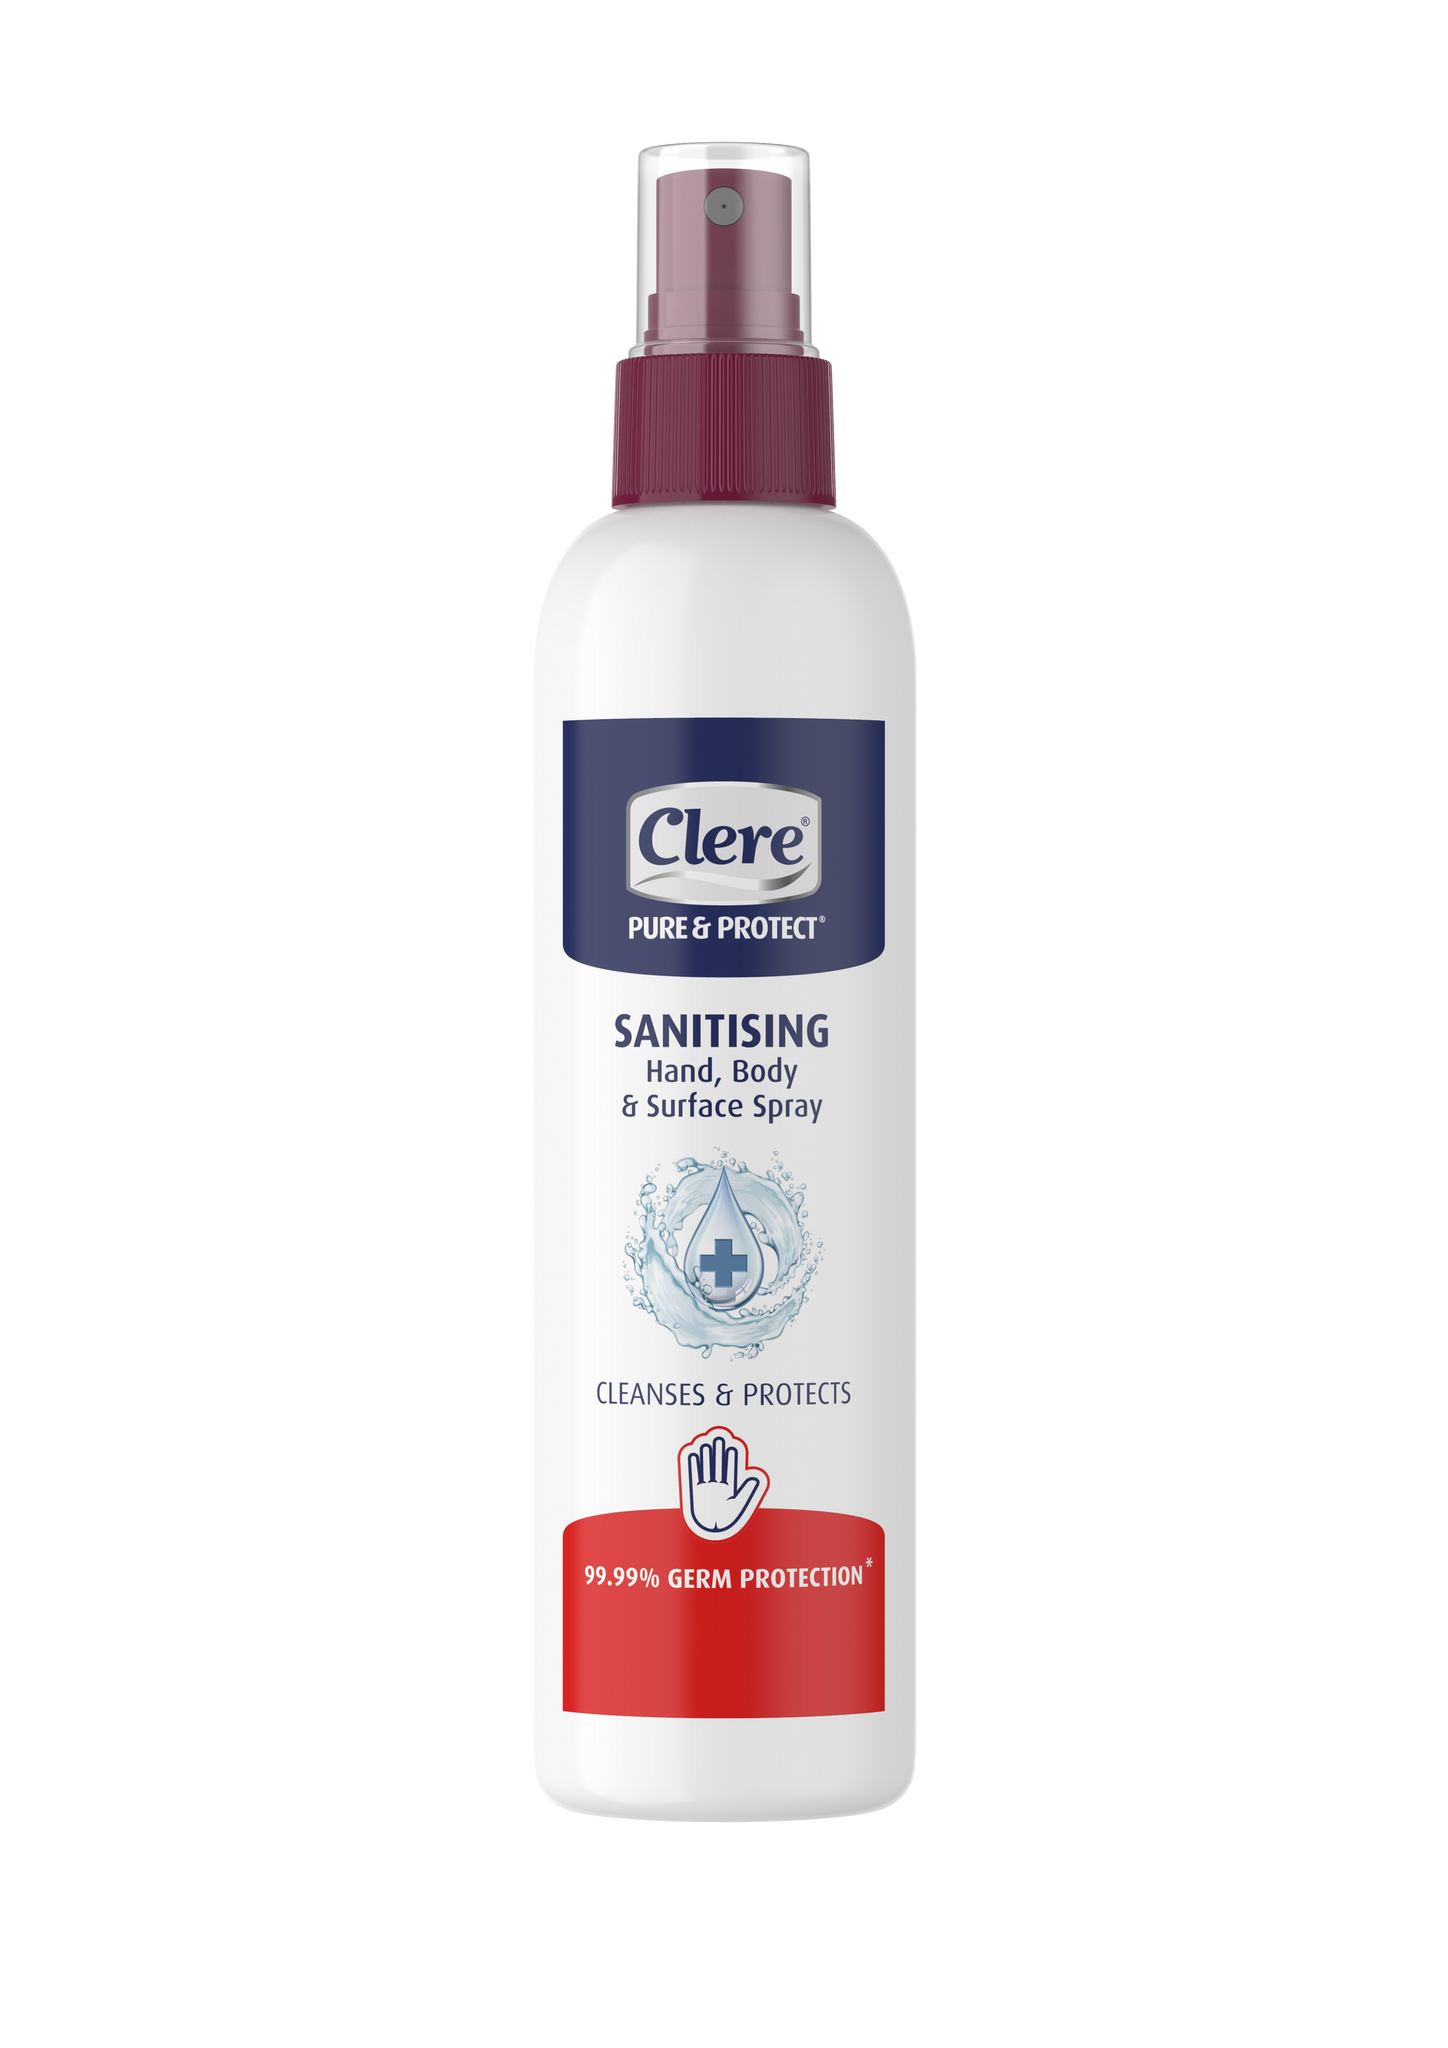 Clere Pure & Protect Sanitising Hand - Body & Surface Spray (Pump bottle) - Liquid - 250ml